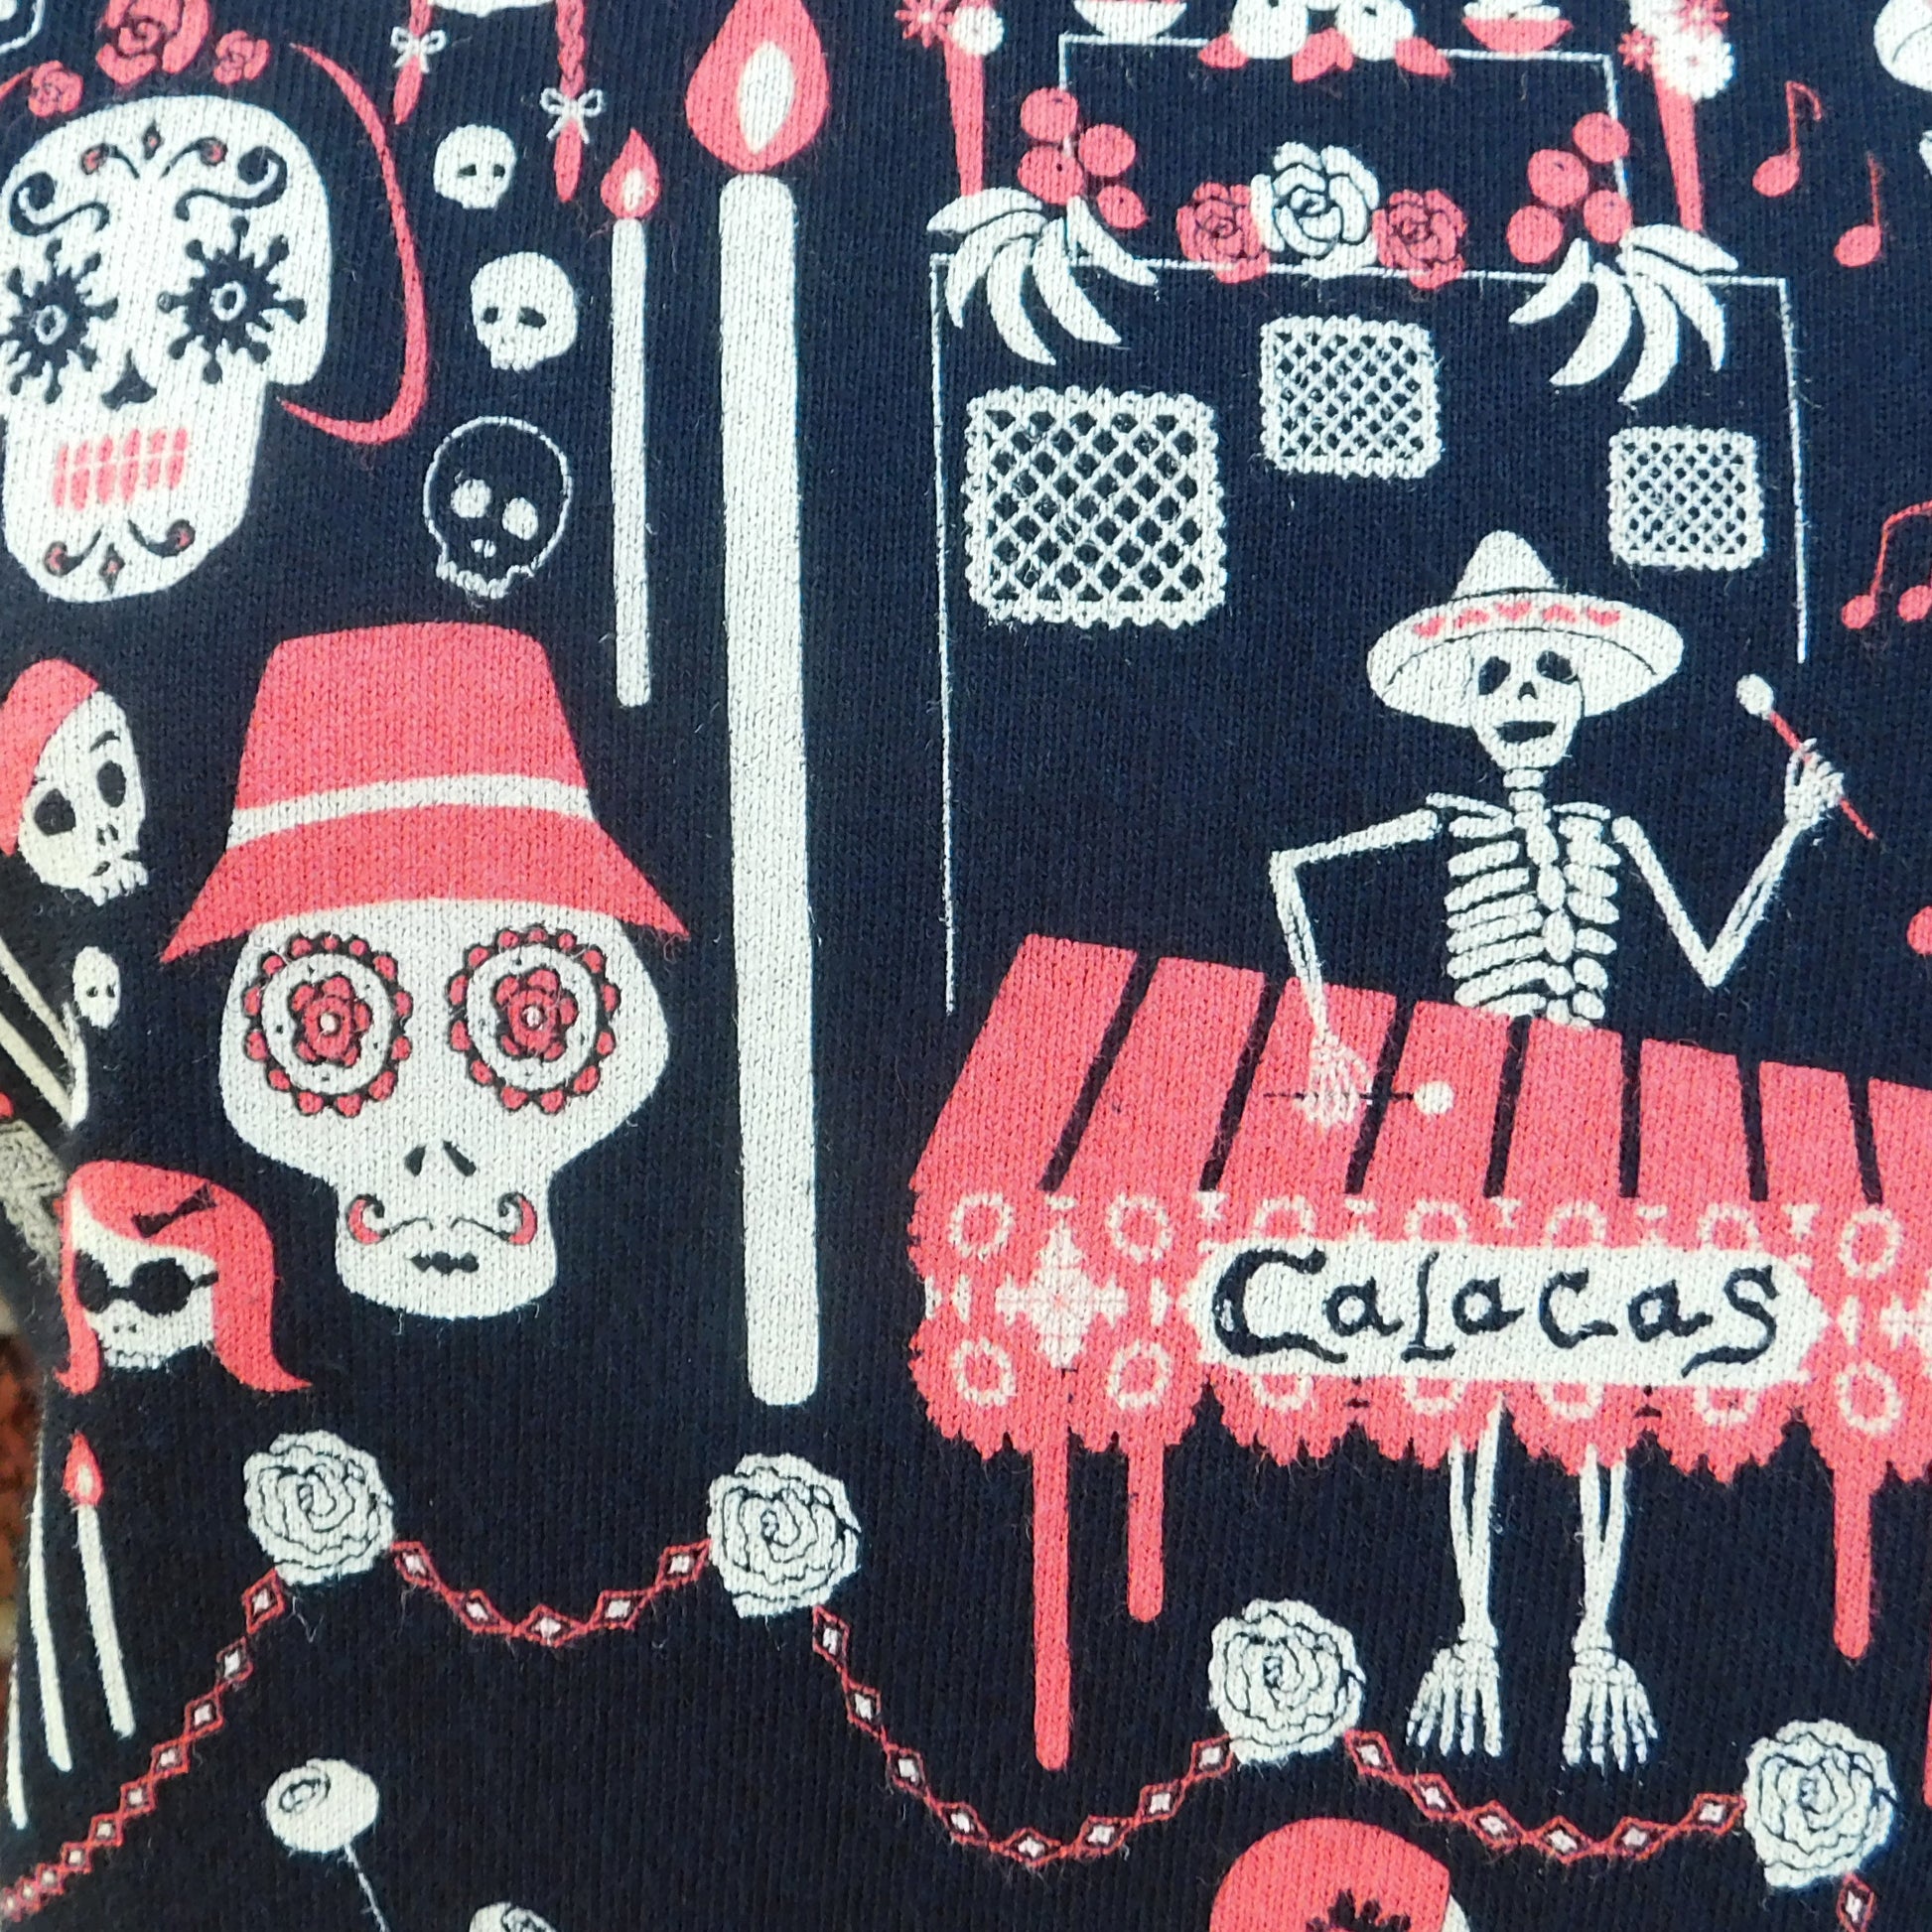 Closeup of fabric featuring graphic of skeletons celebrating and riding bikes